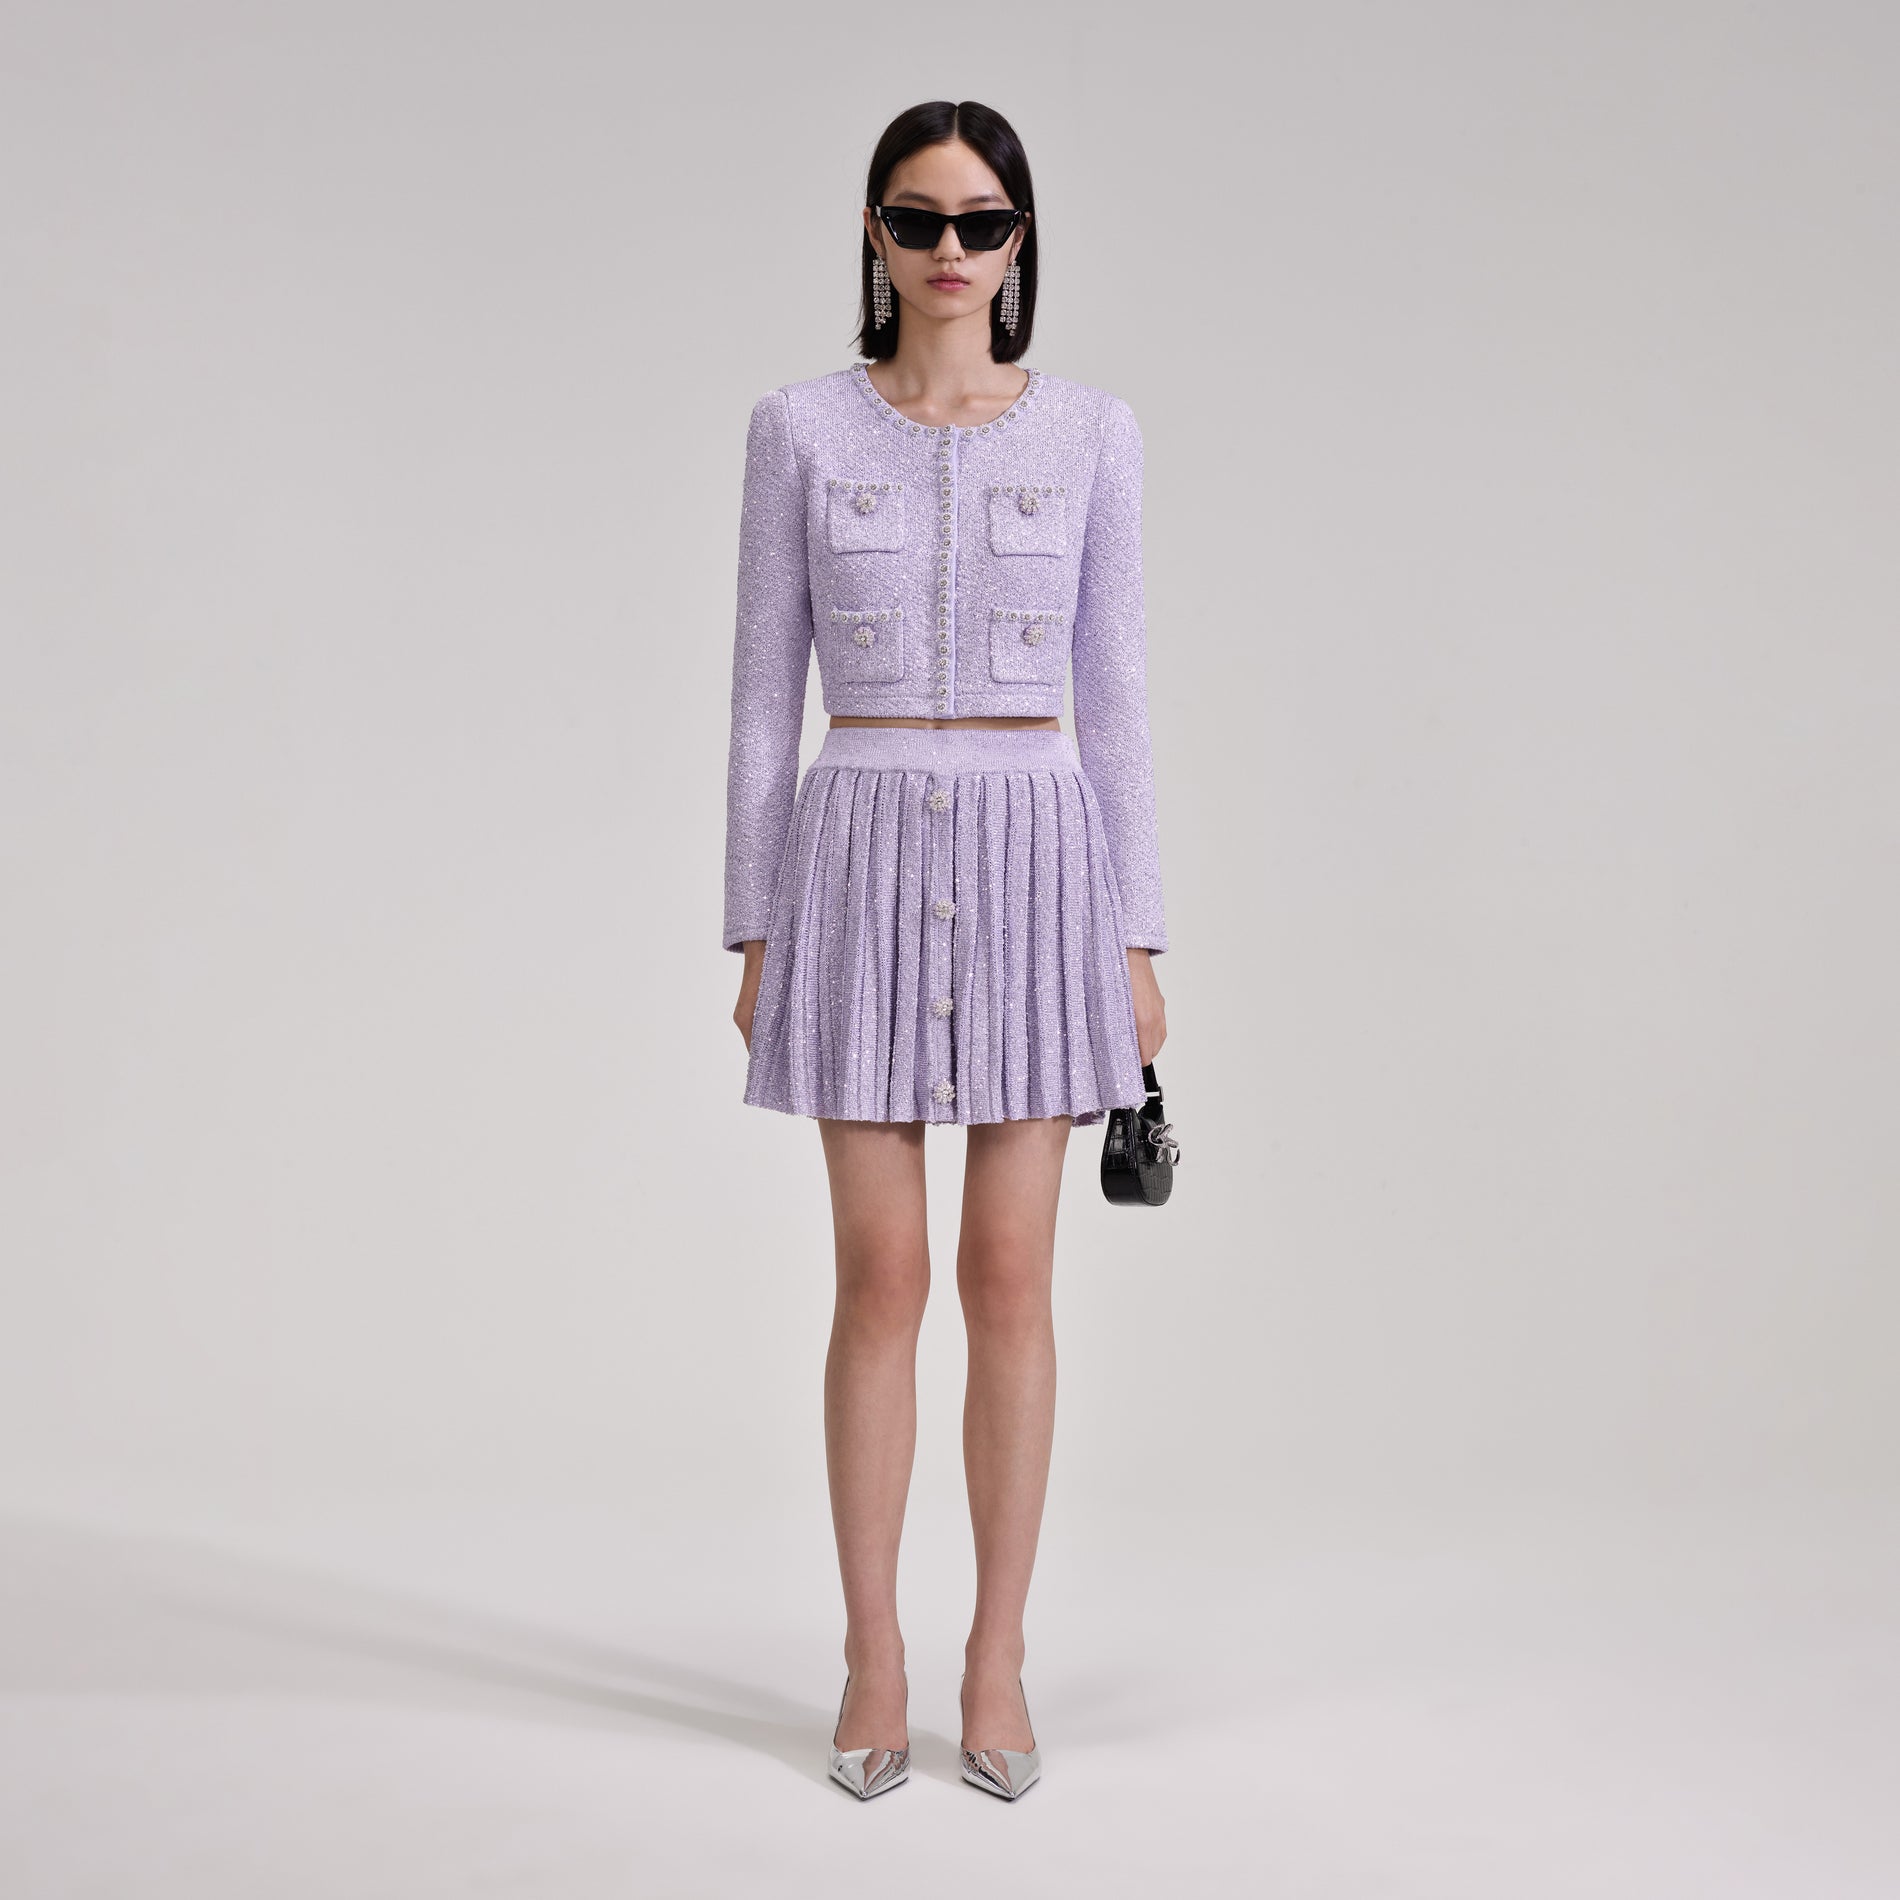 A woman wearing the Lilac Sequin Pleated Knit Skirt